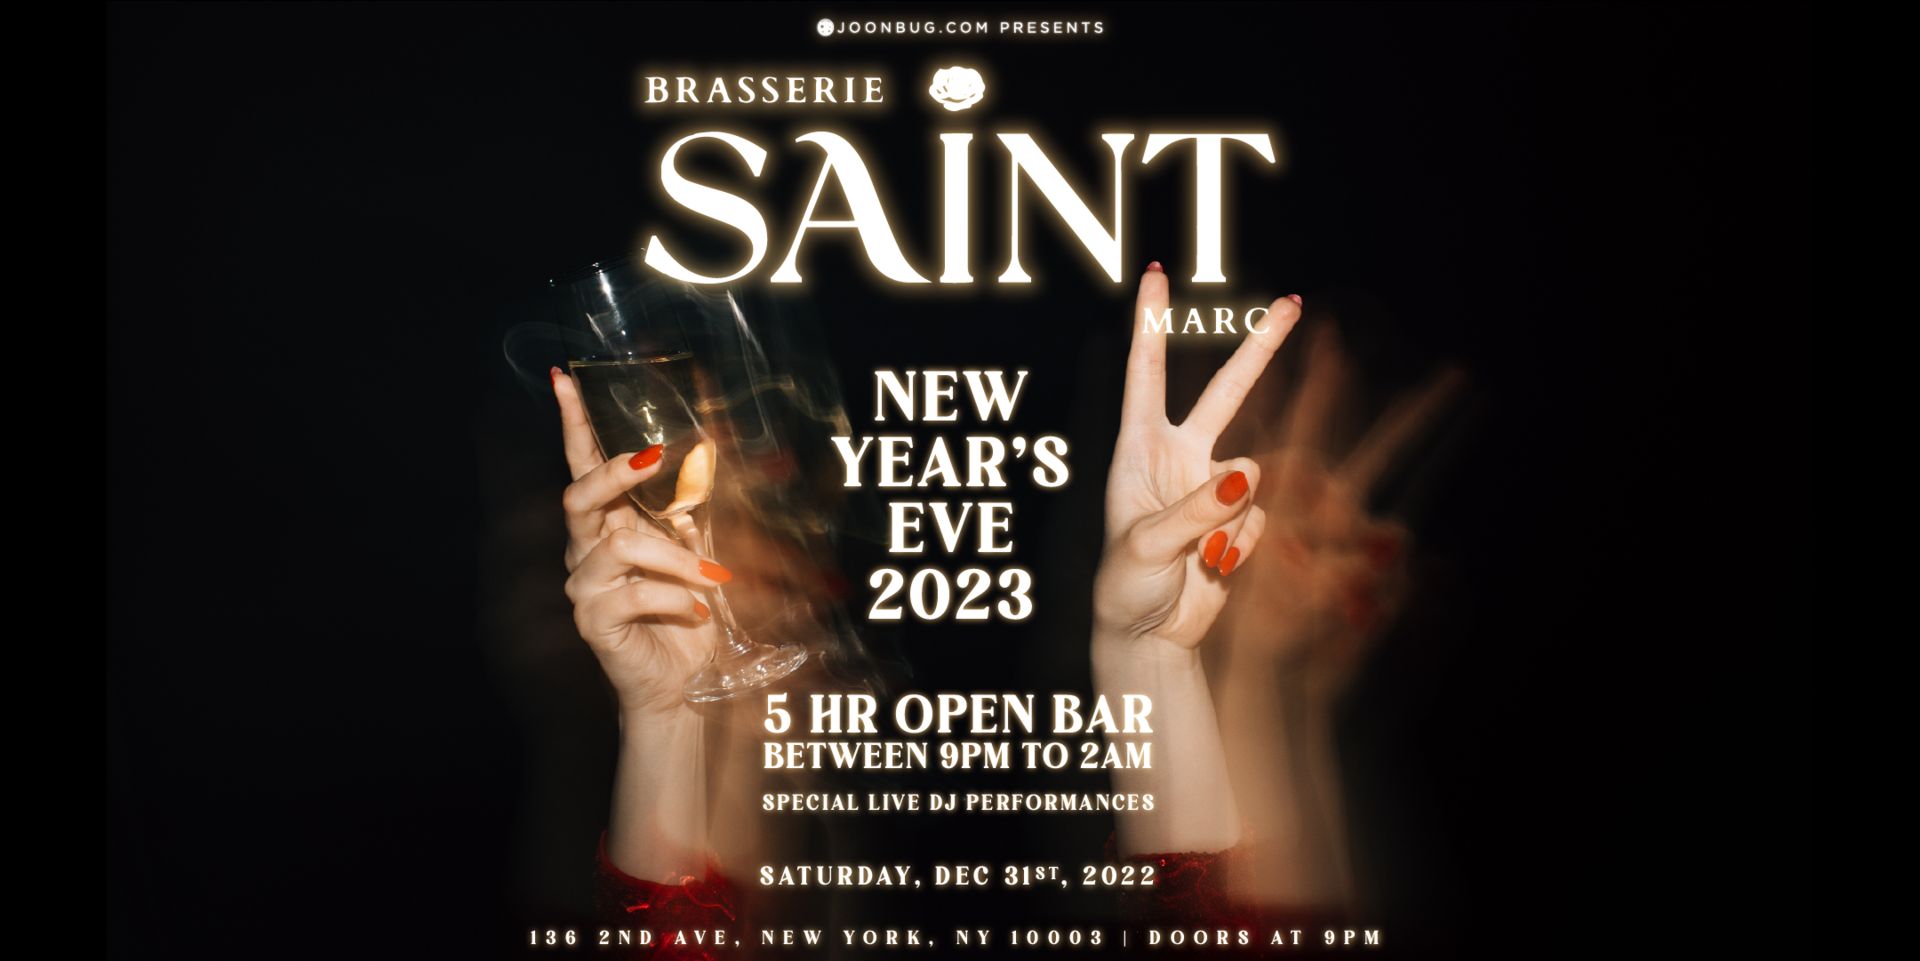 Brasserie Saint Marc New Years Eve Party 2023, New York, United States